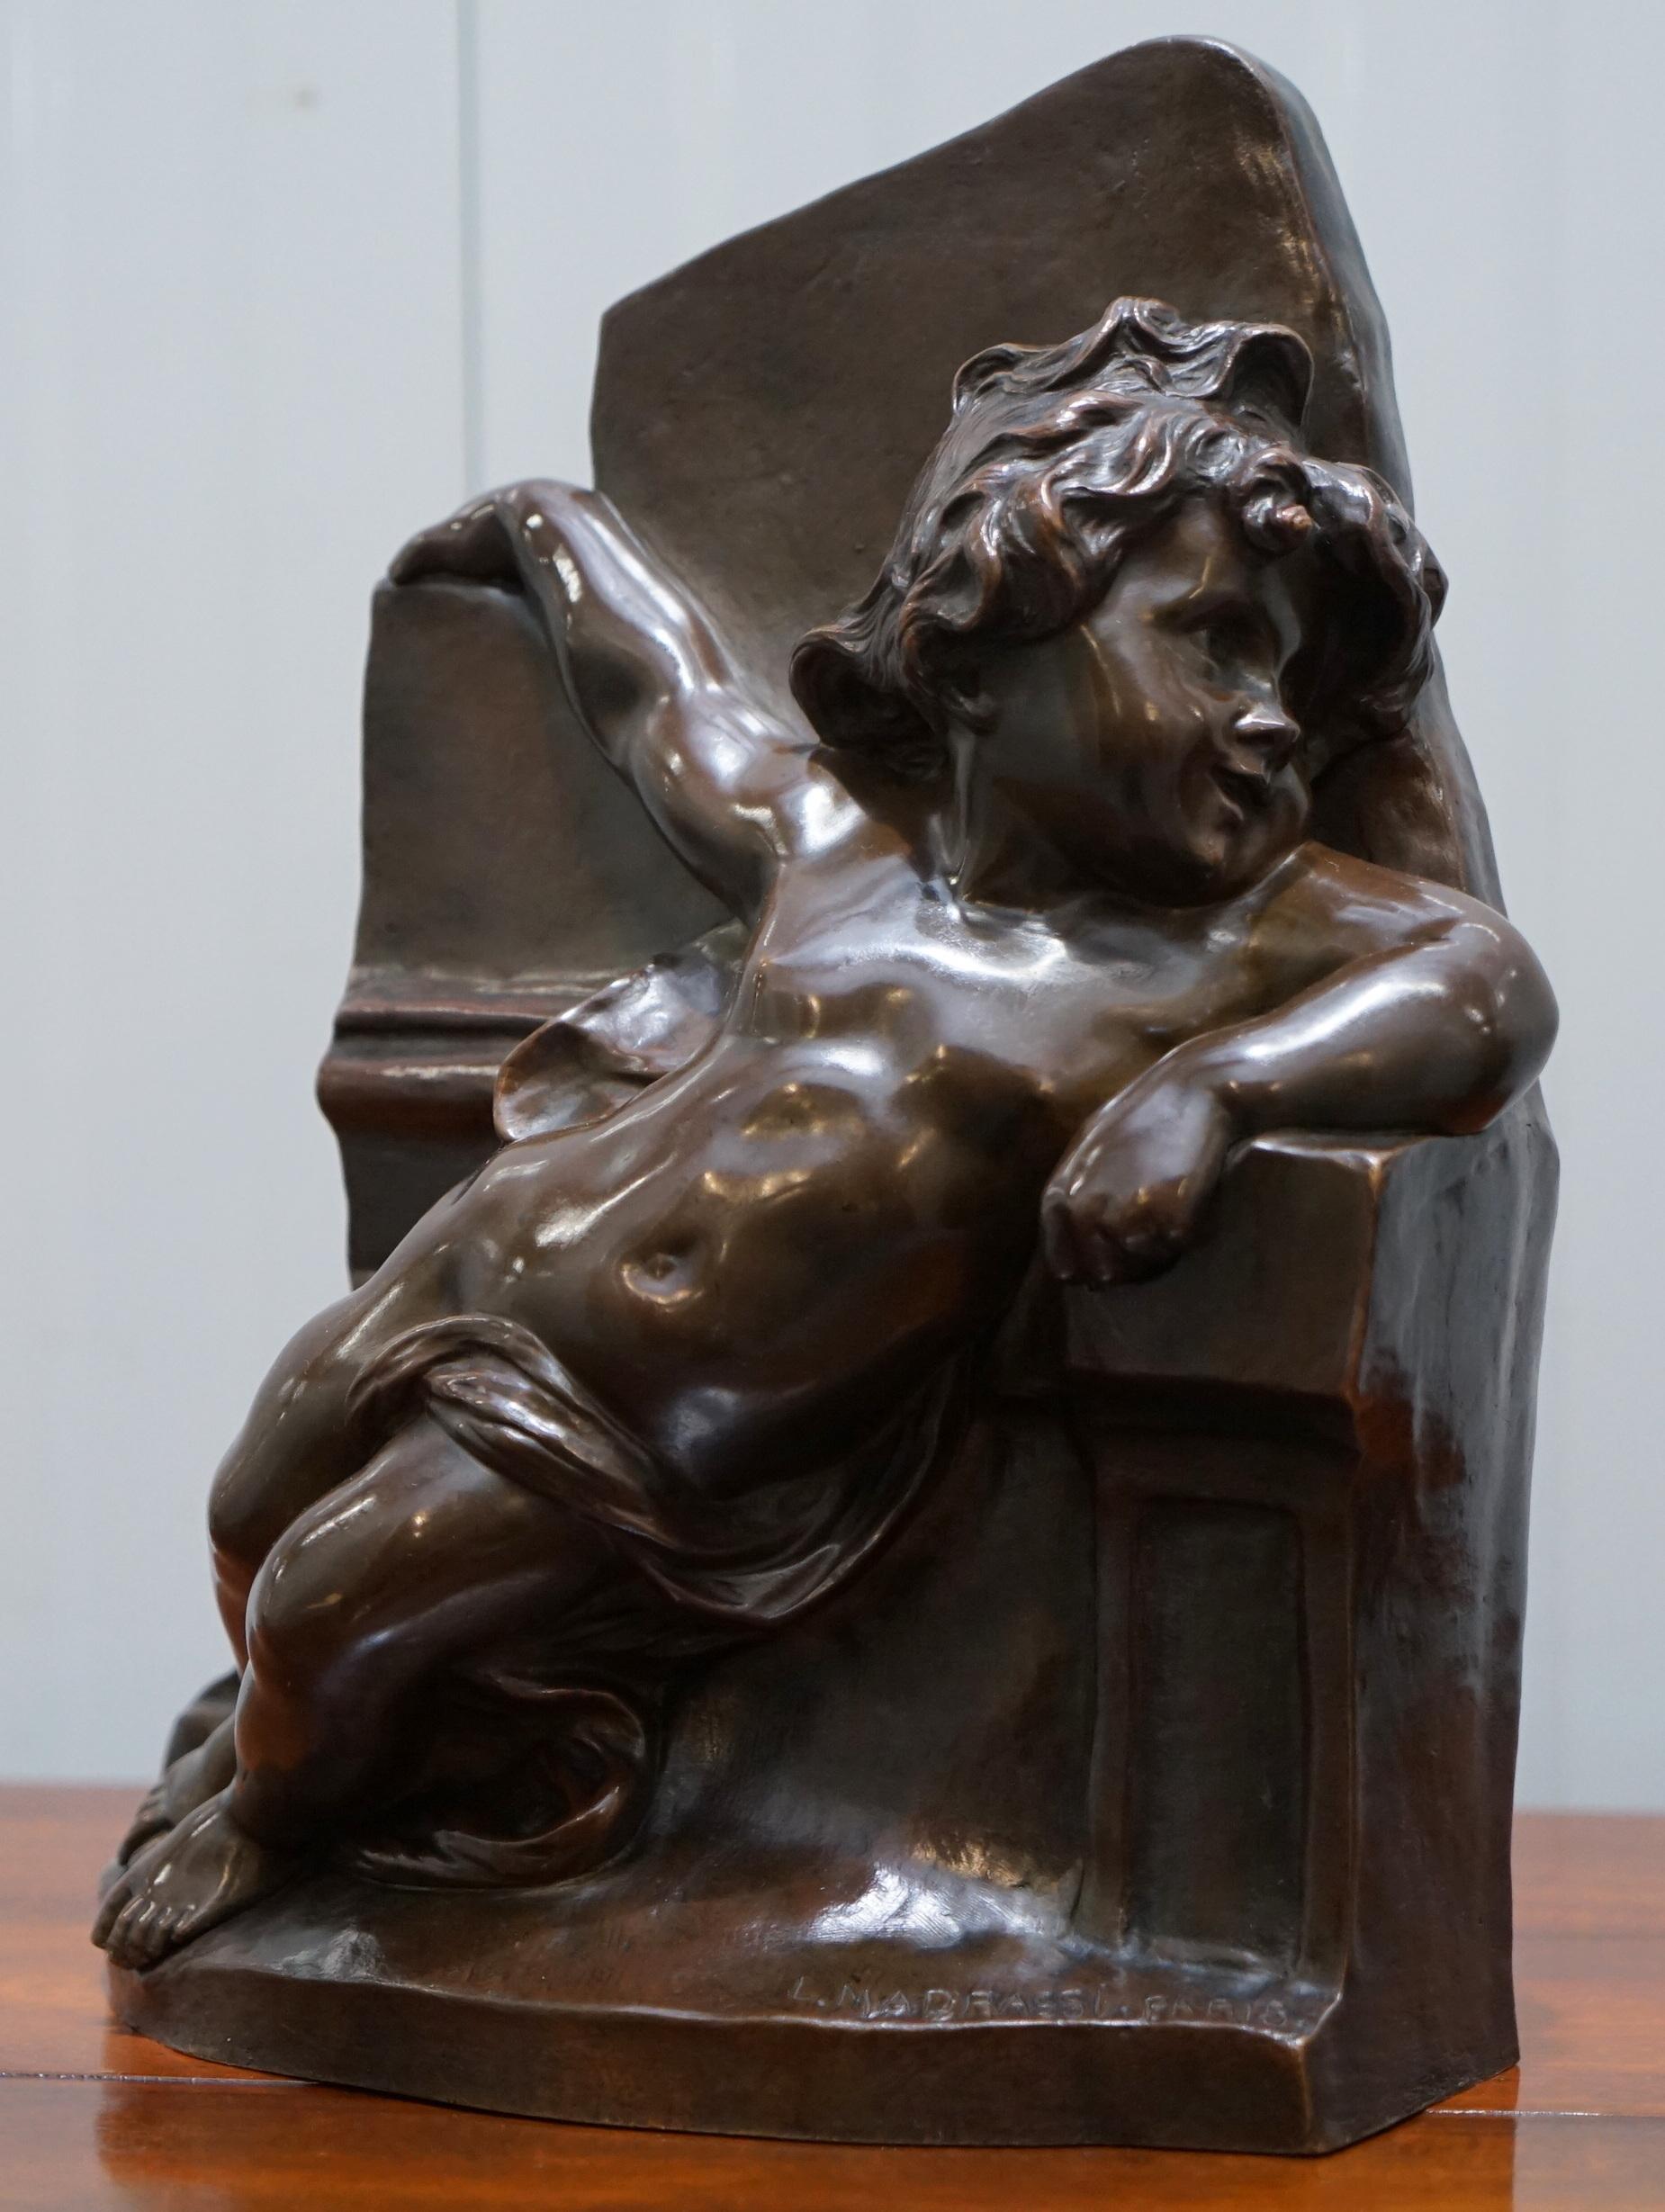 We are delighted to offer for sale this rare Napoleon III era large sized bronze statue of a Little Cherub Angel signed Luca Madrasi (1848-1919)

A very decorative and good sized piece, its rare to find a Cherub with a background setting in